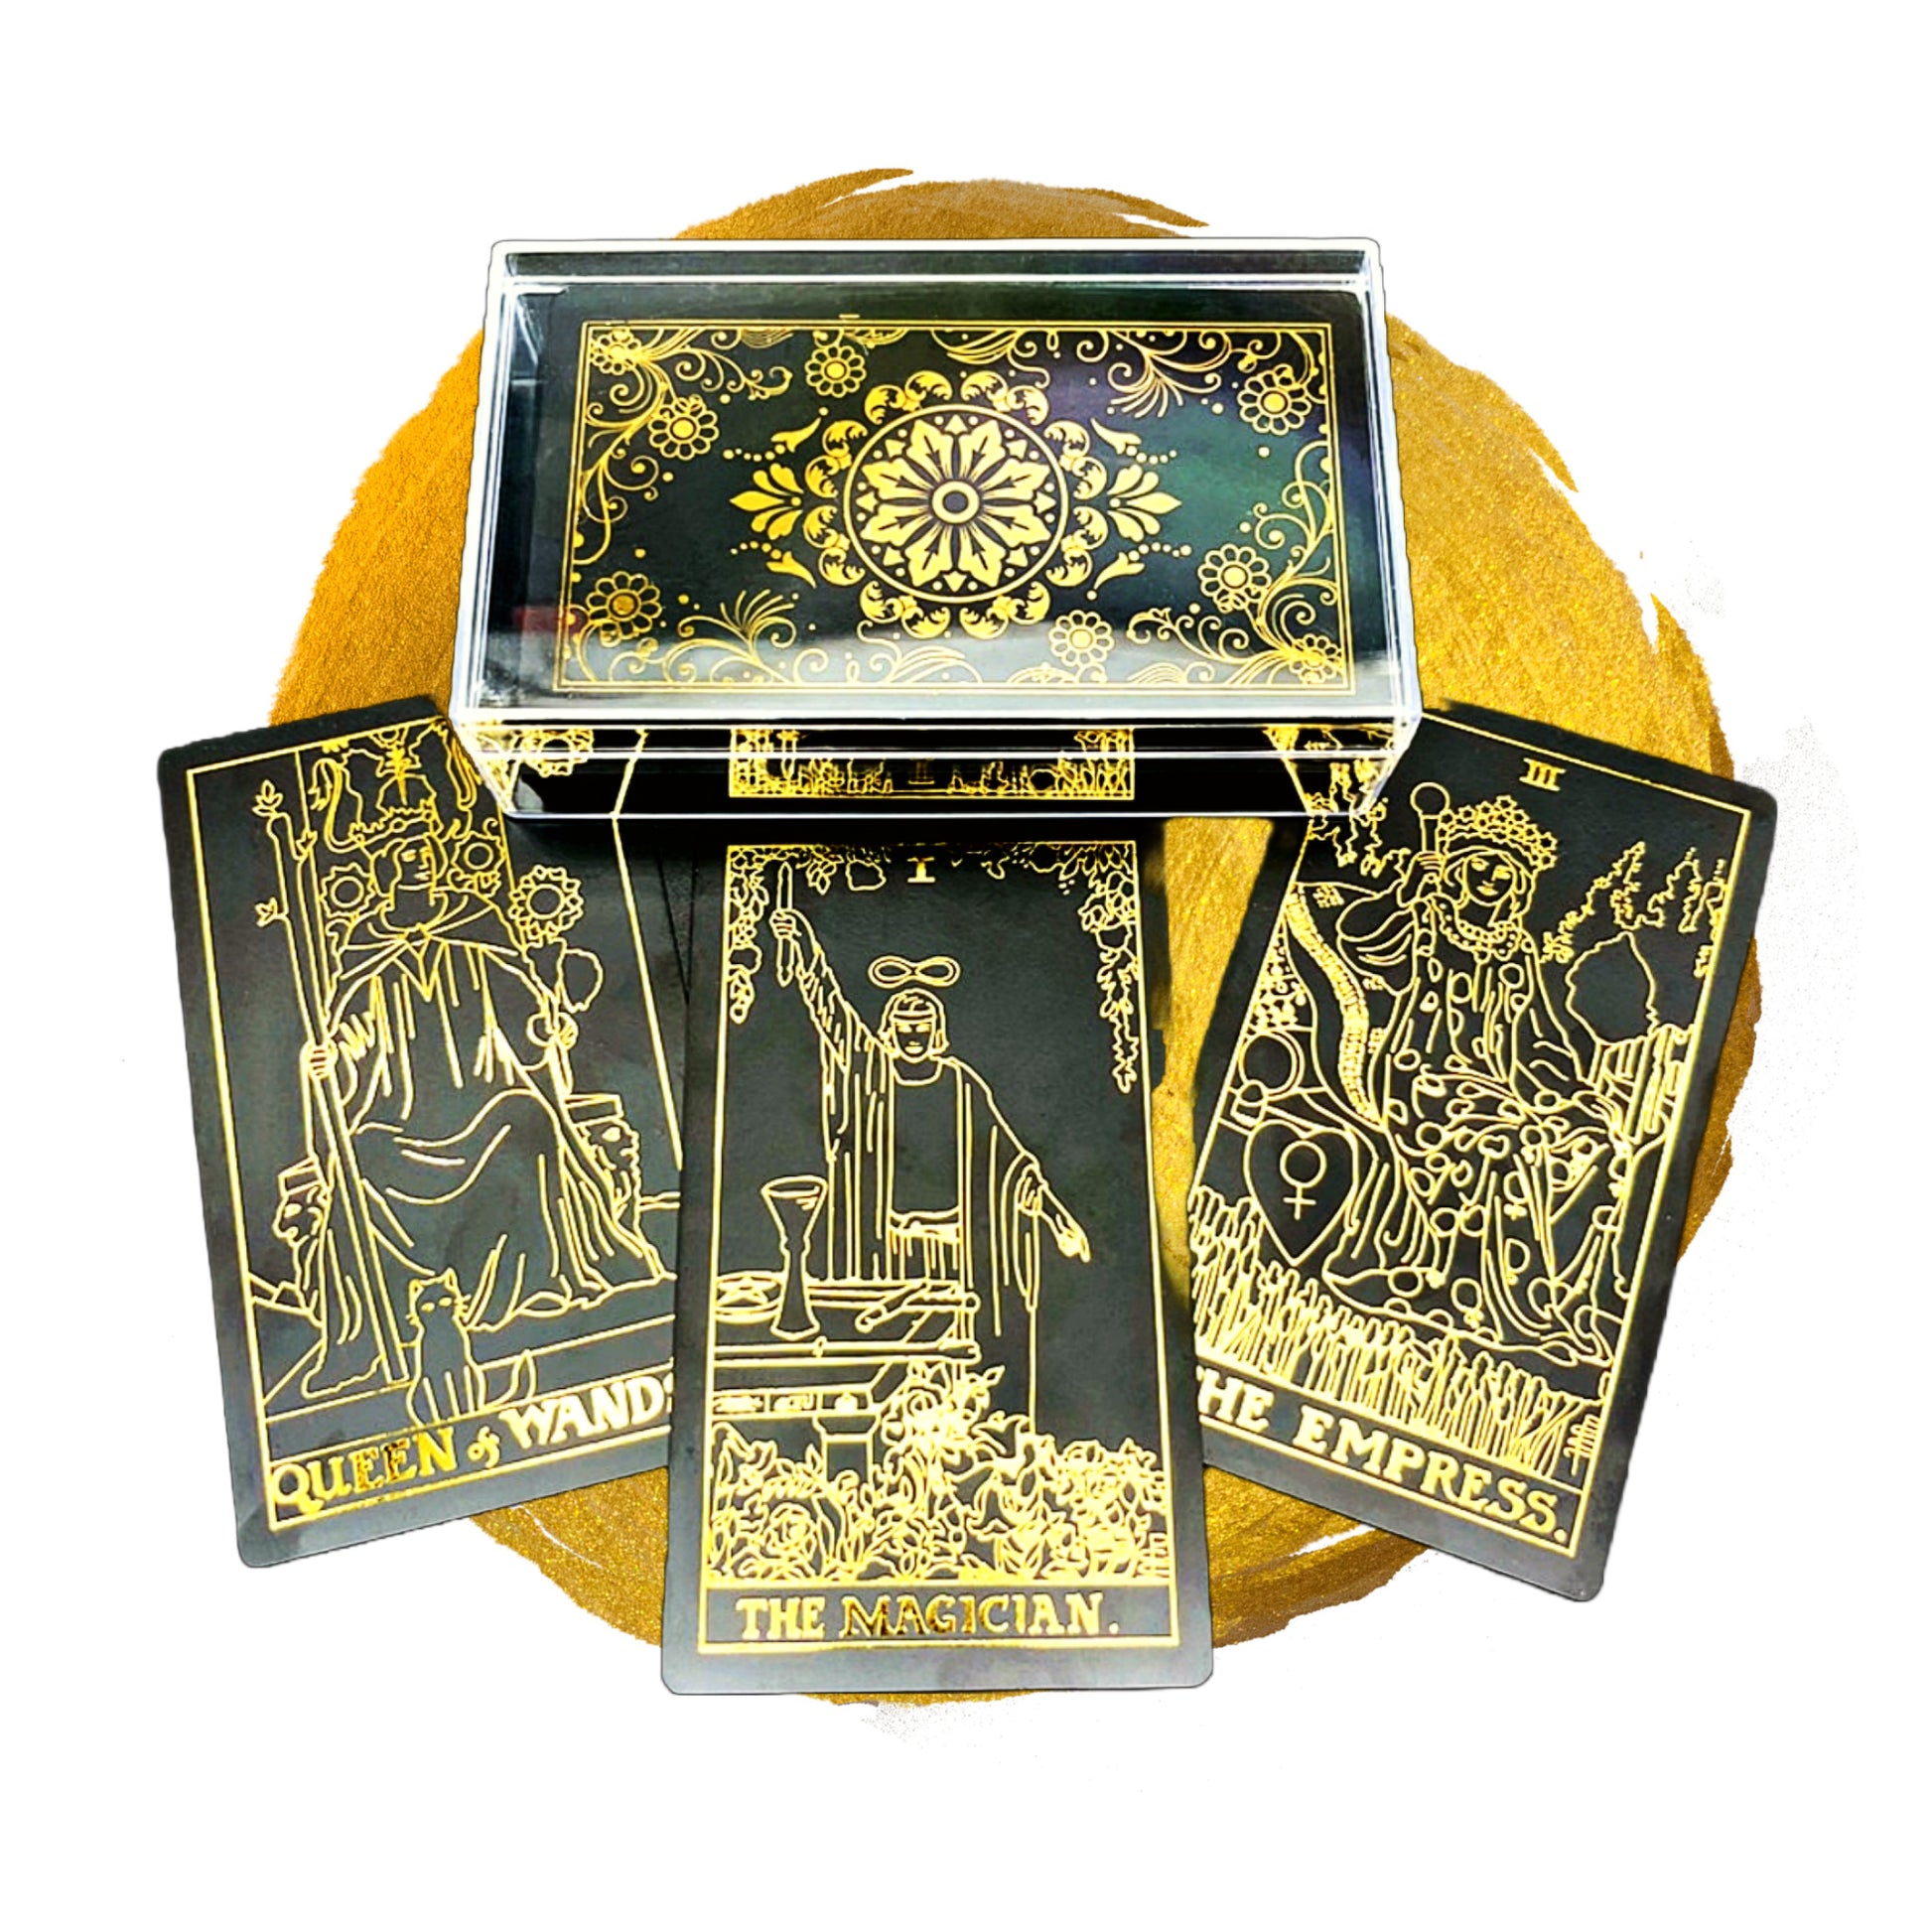 Gold Foil Tarot Cards Deck With English Guidebook In Premium Acrylic Gift Box | RWS-Inspired Plastic Card Oracle Divination Set | Apollo Tarot Shop